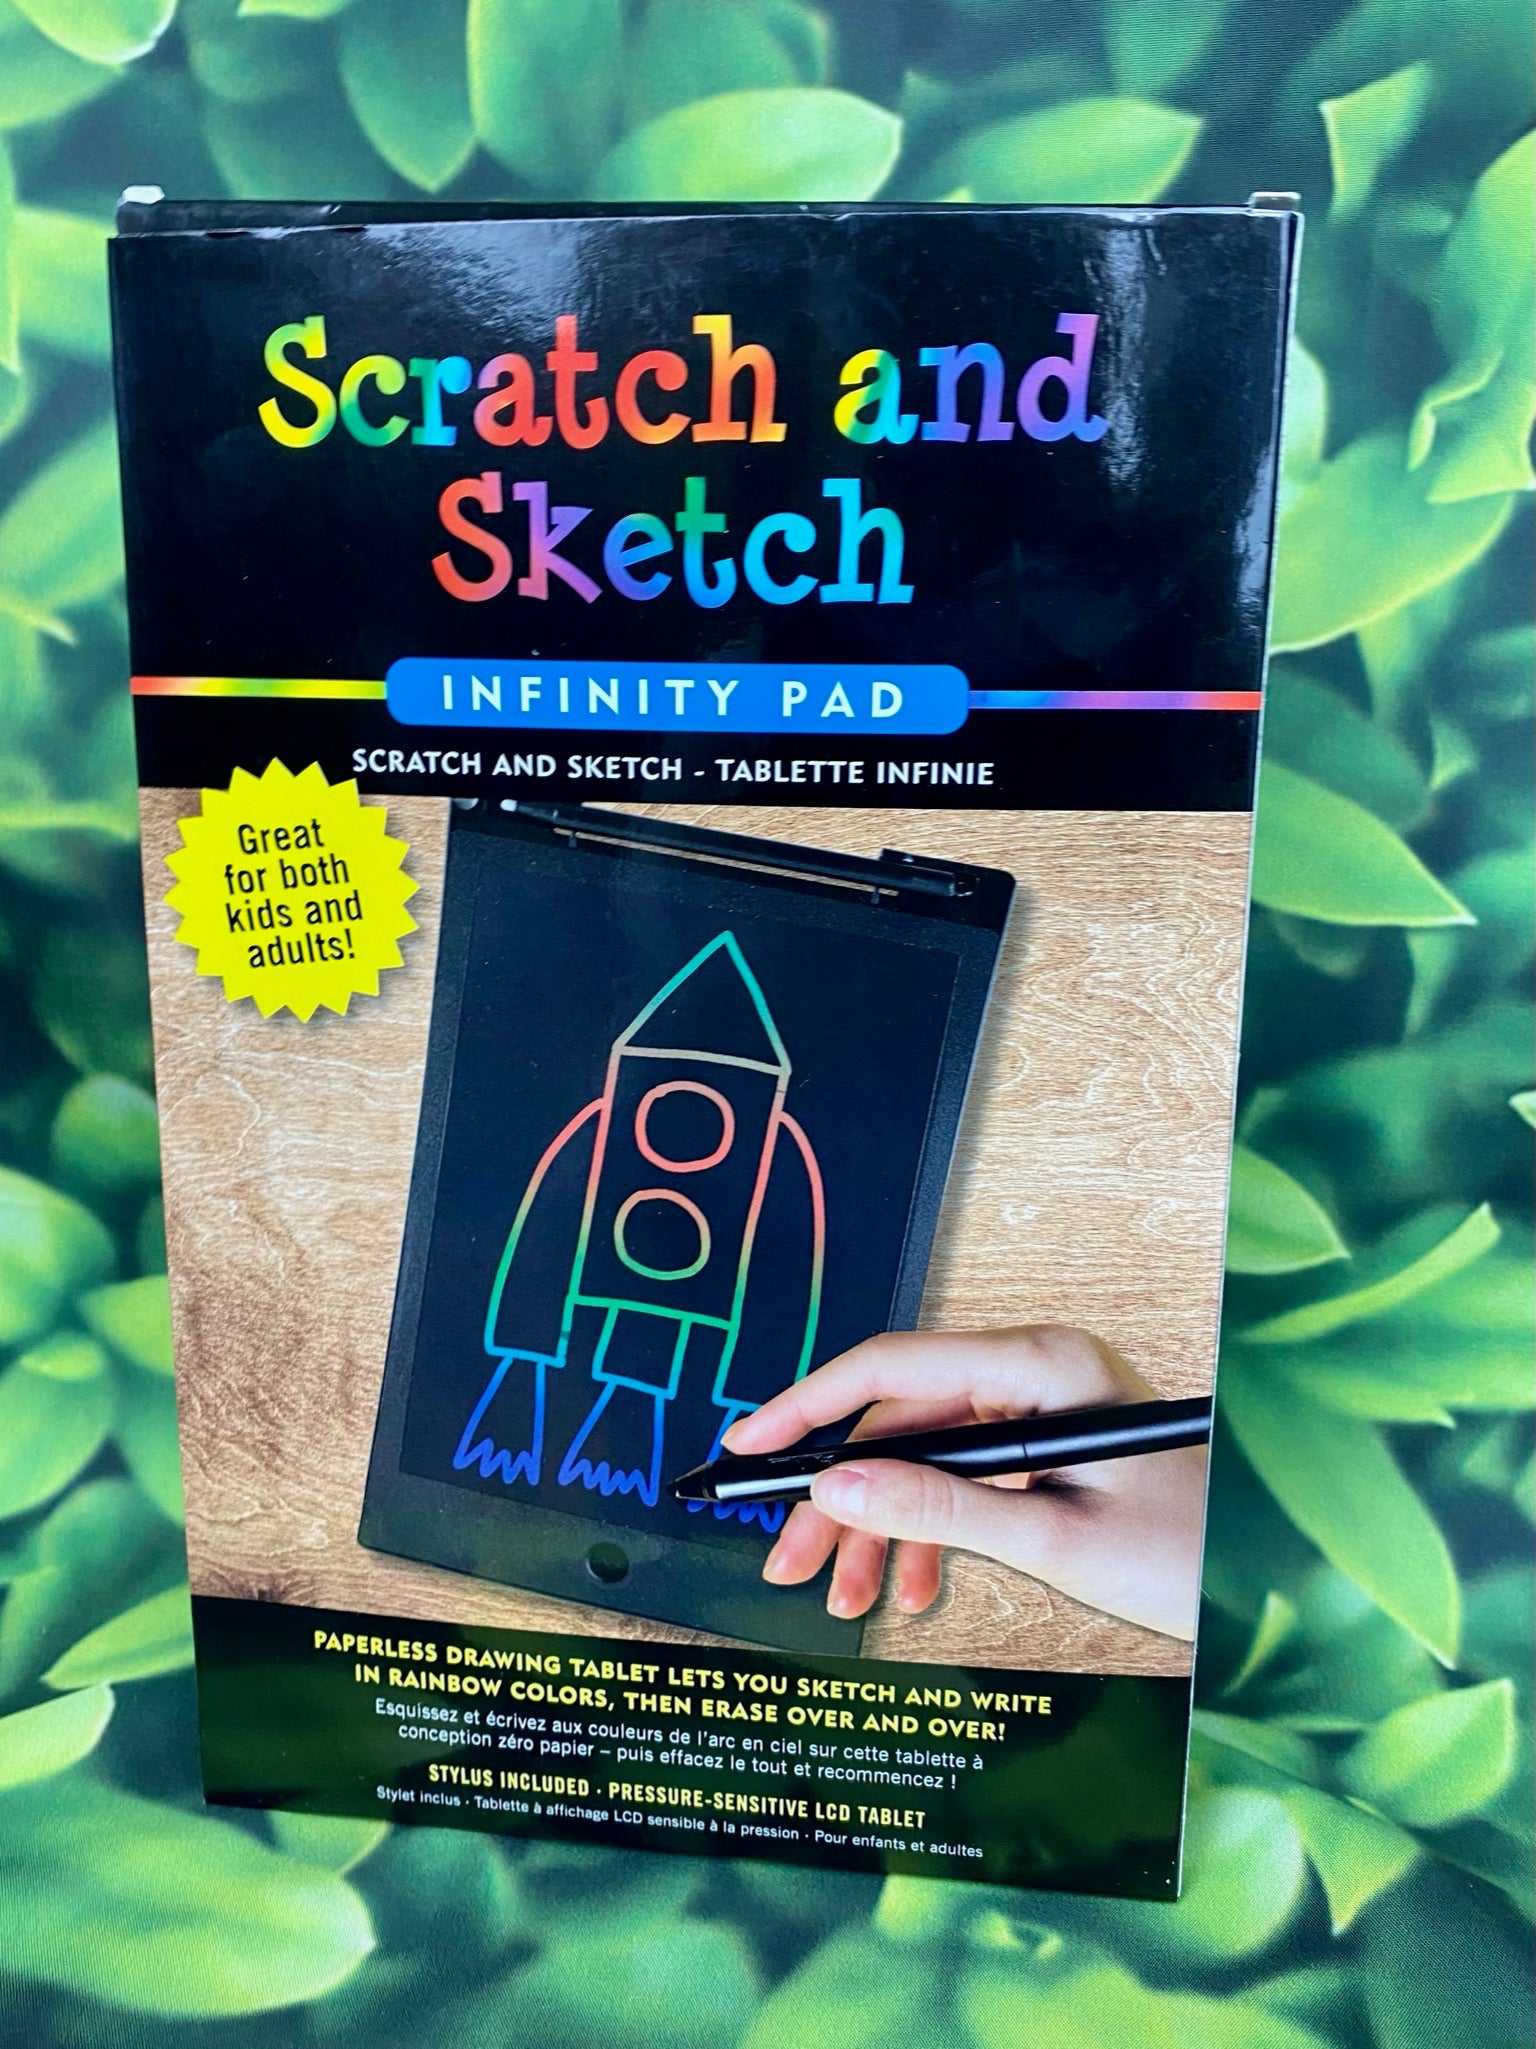 Scratch and Sketch - At the Beach